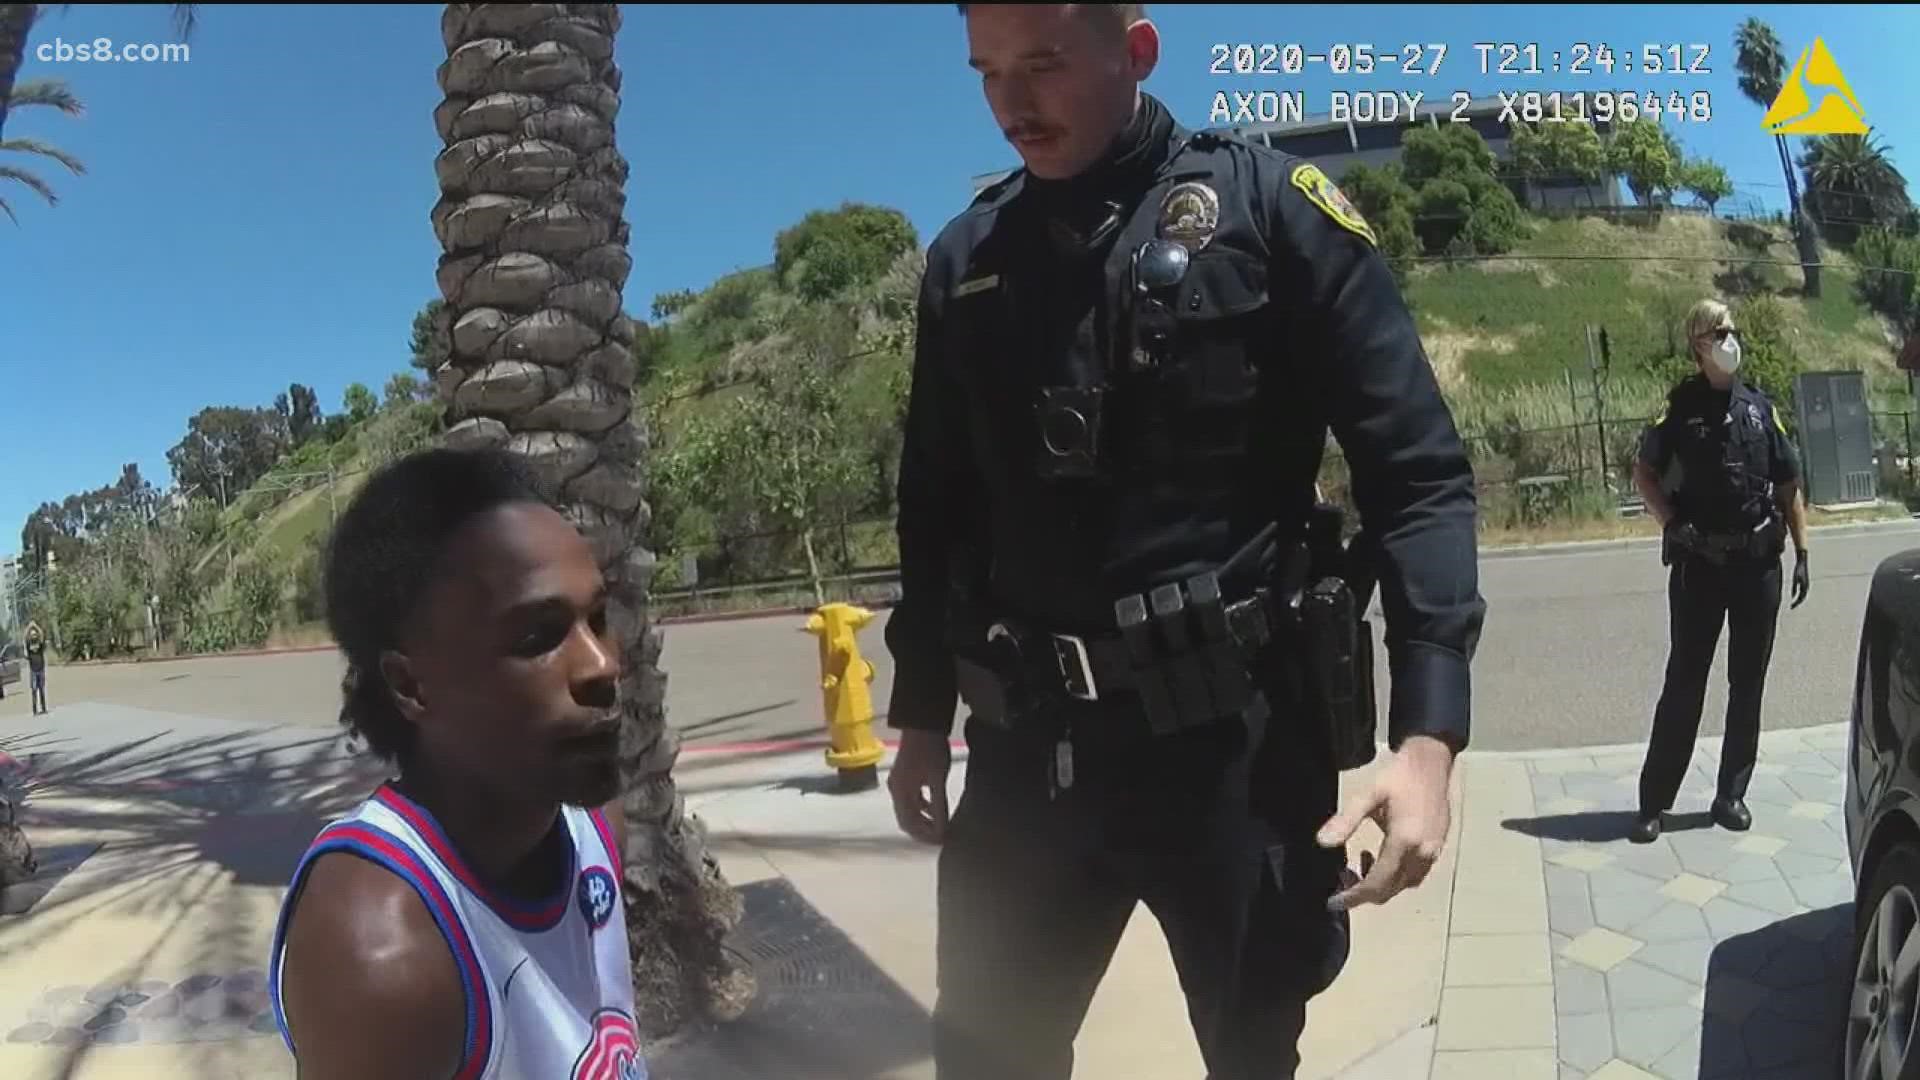 The former La Mesa police officer is accused of falsifying a police report related to the May 2020 arrest of Amaurie Johnson.